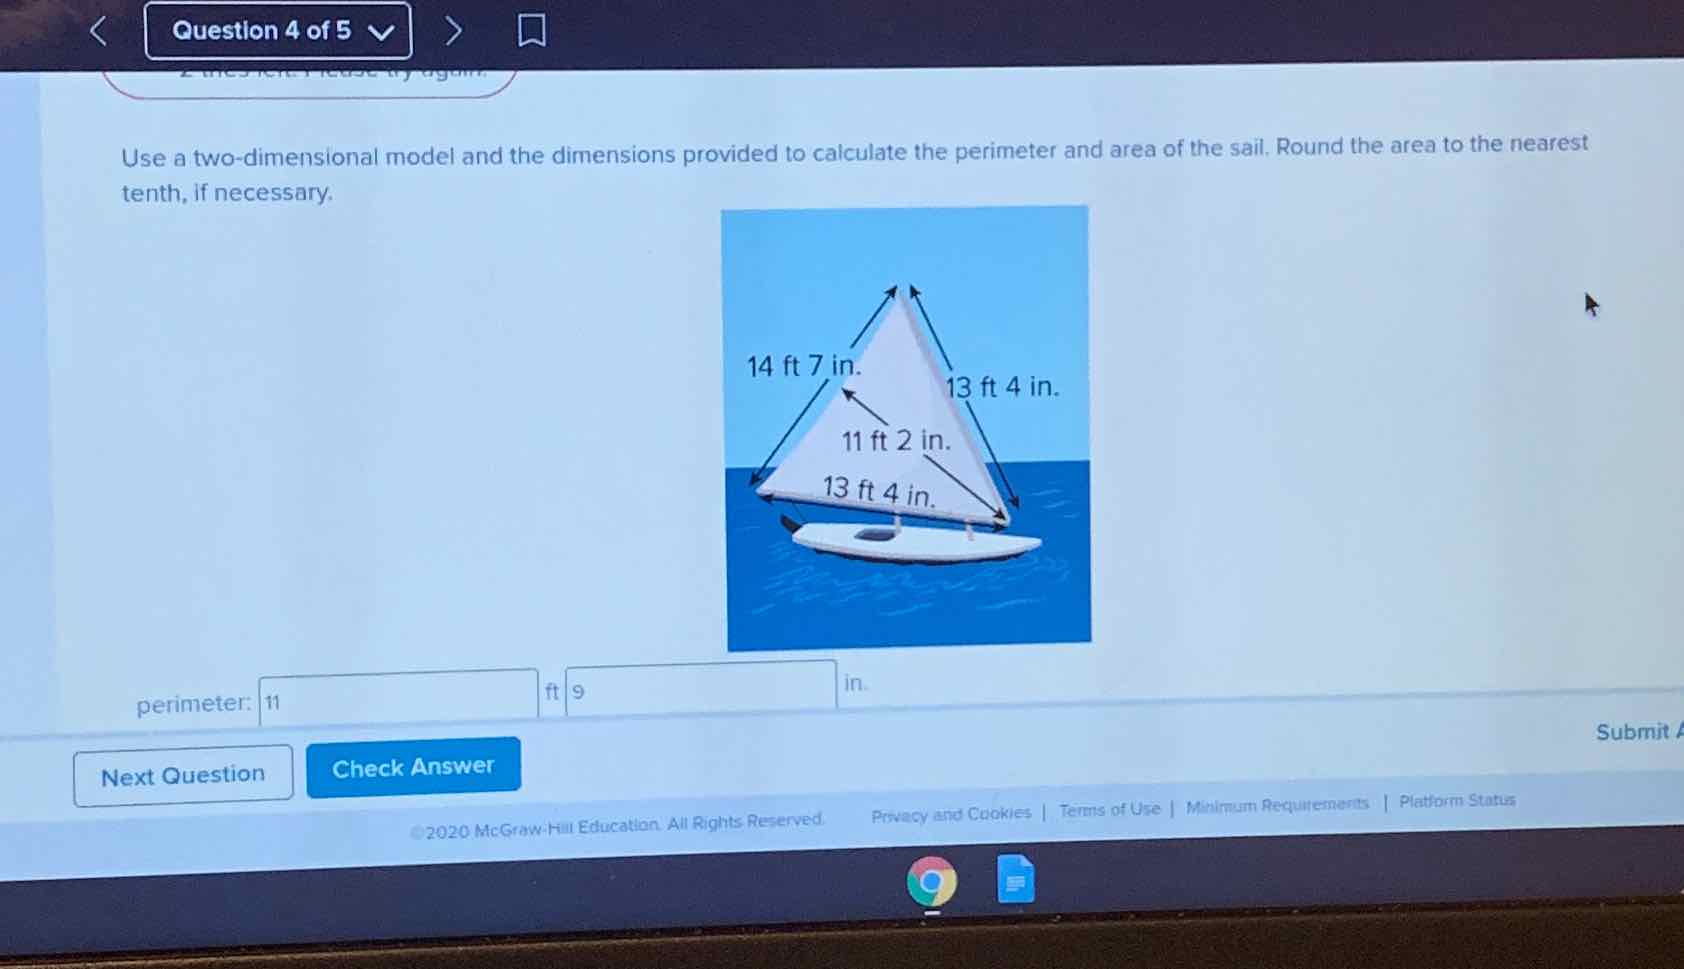 Use a two-dimensional model and the dimensions provided to calculate the perimeter and area of the sail. Round the area to the nearest tenth, if necessary.
perimeter: 11
Next Question Check Answer
Submit
2020 Me Graw. Hill Education All Rights Reserved.